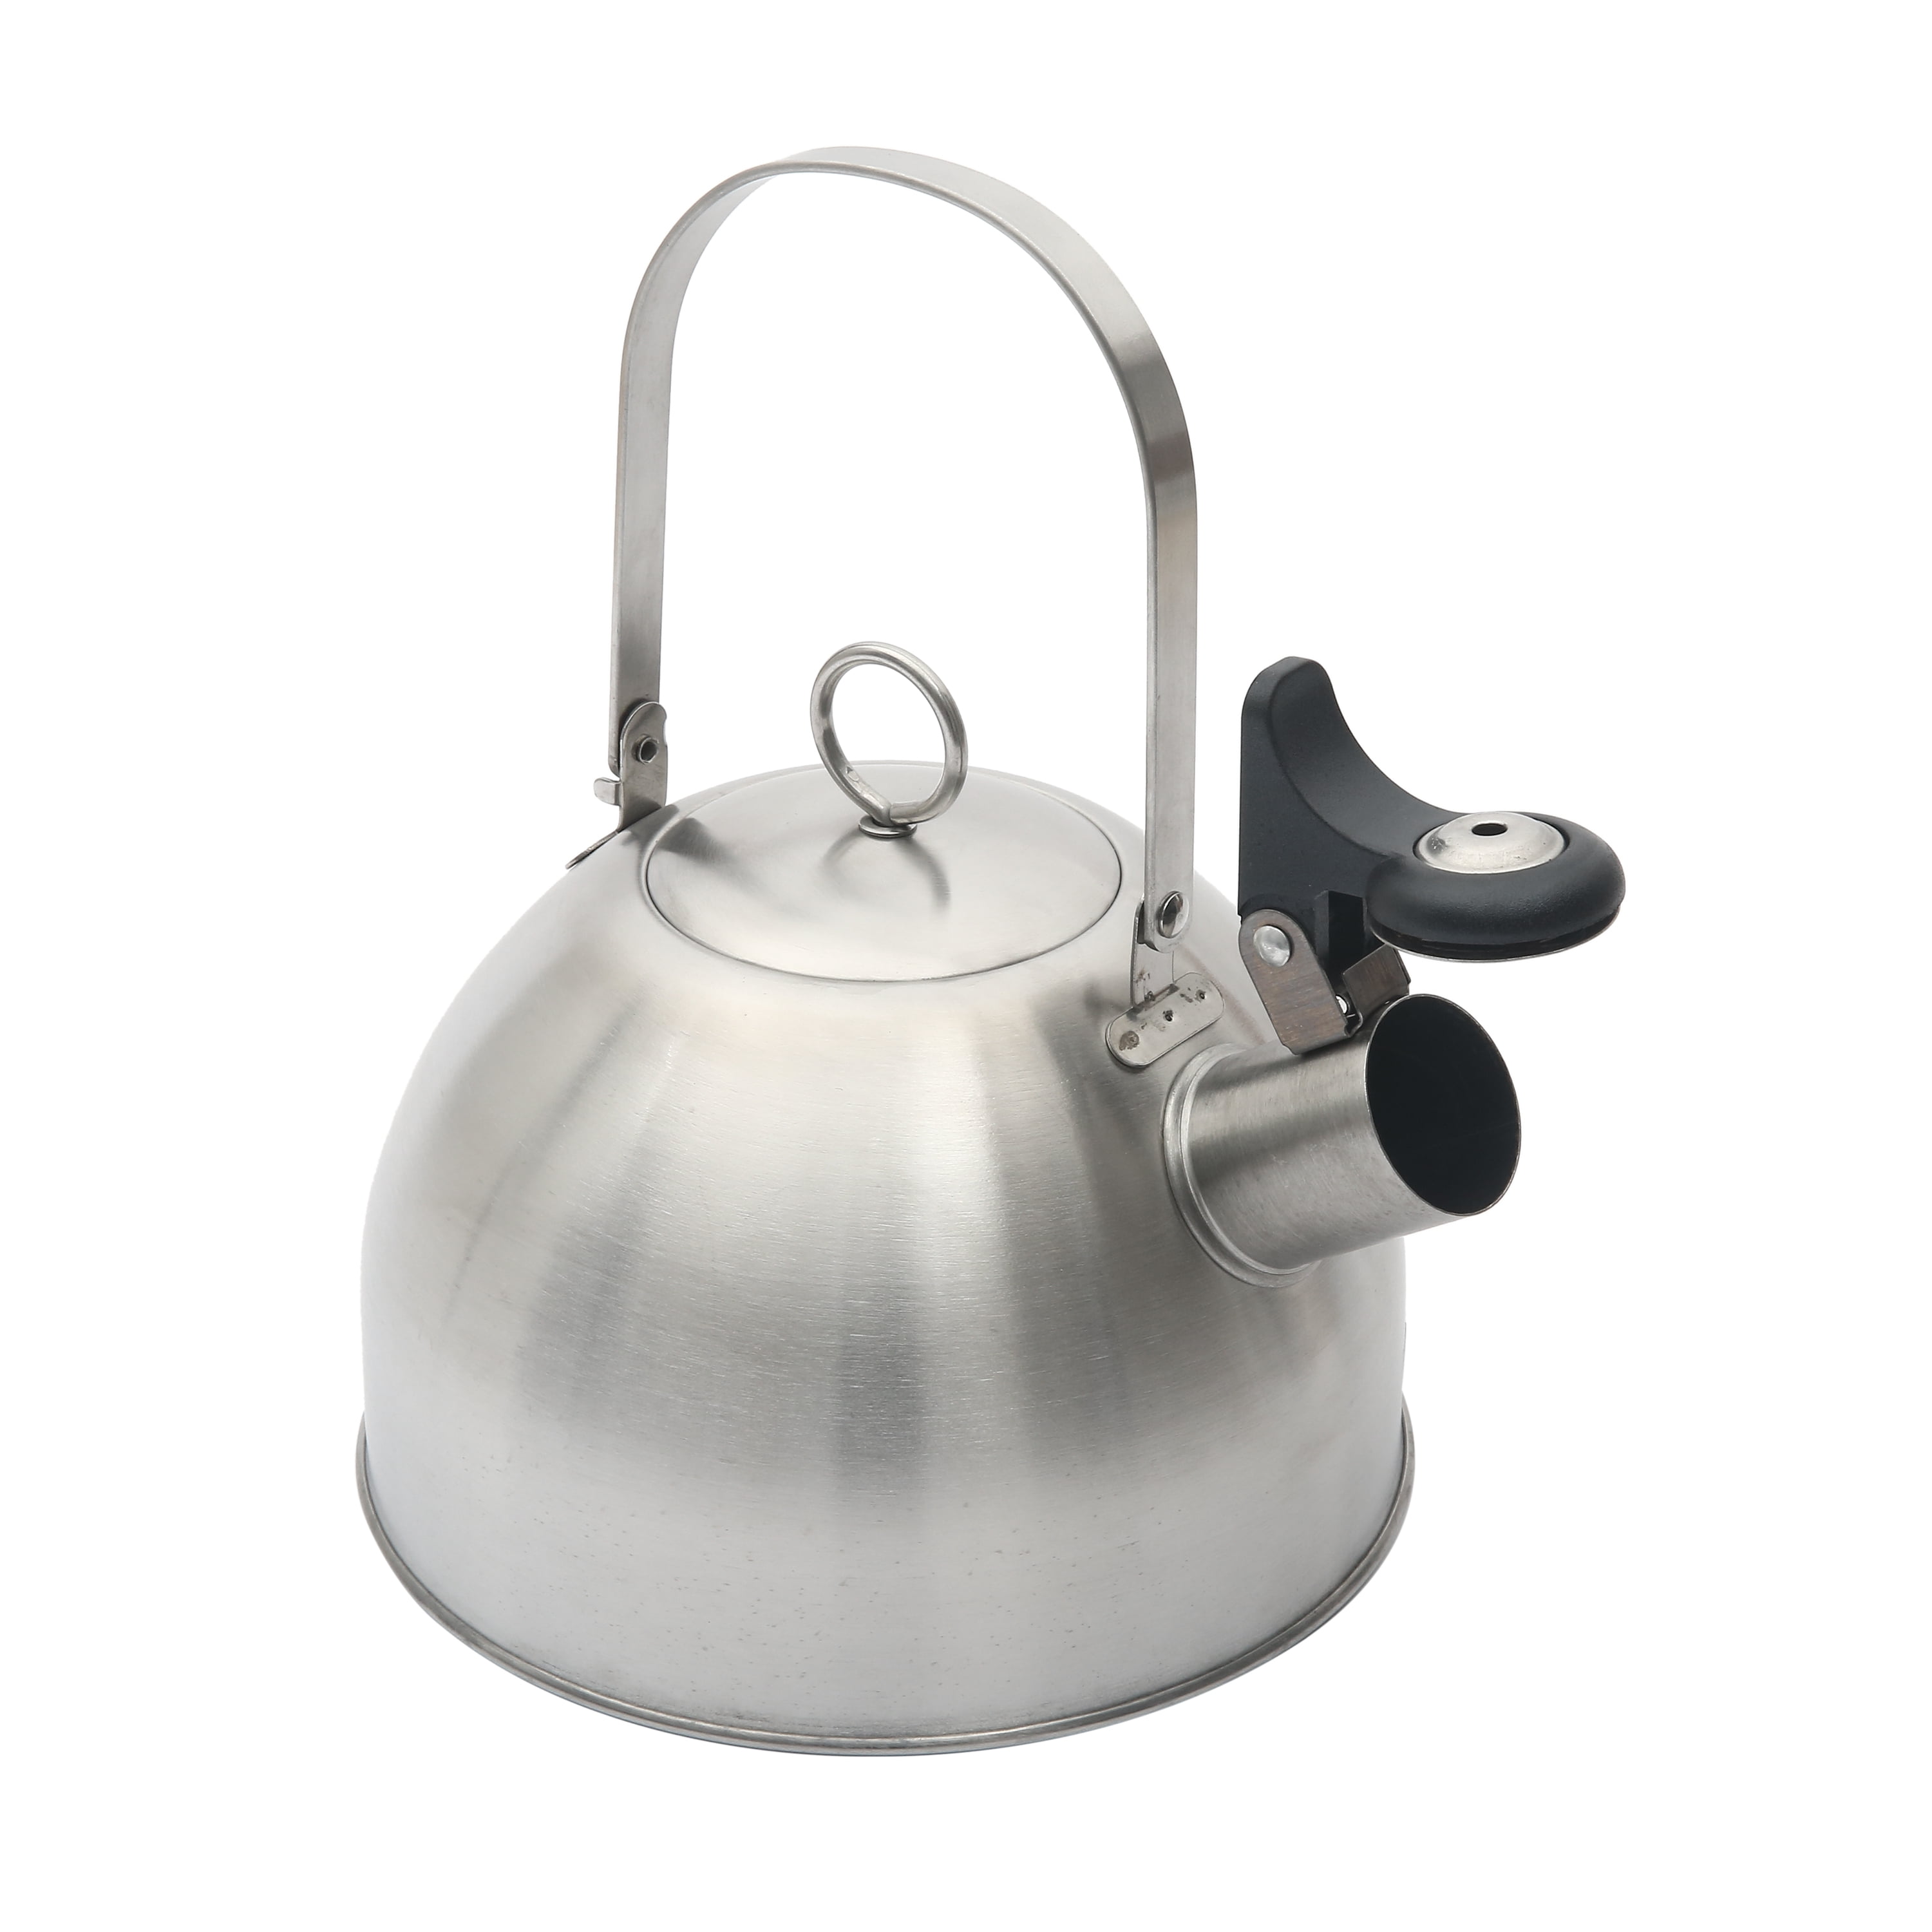 Portable Camping Kettle Camp Tea Pot Stain Resistant Water Boiler Stainless Steel Tea Kettle for Campfire Hiking Backpacking Travel Cooking Black